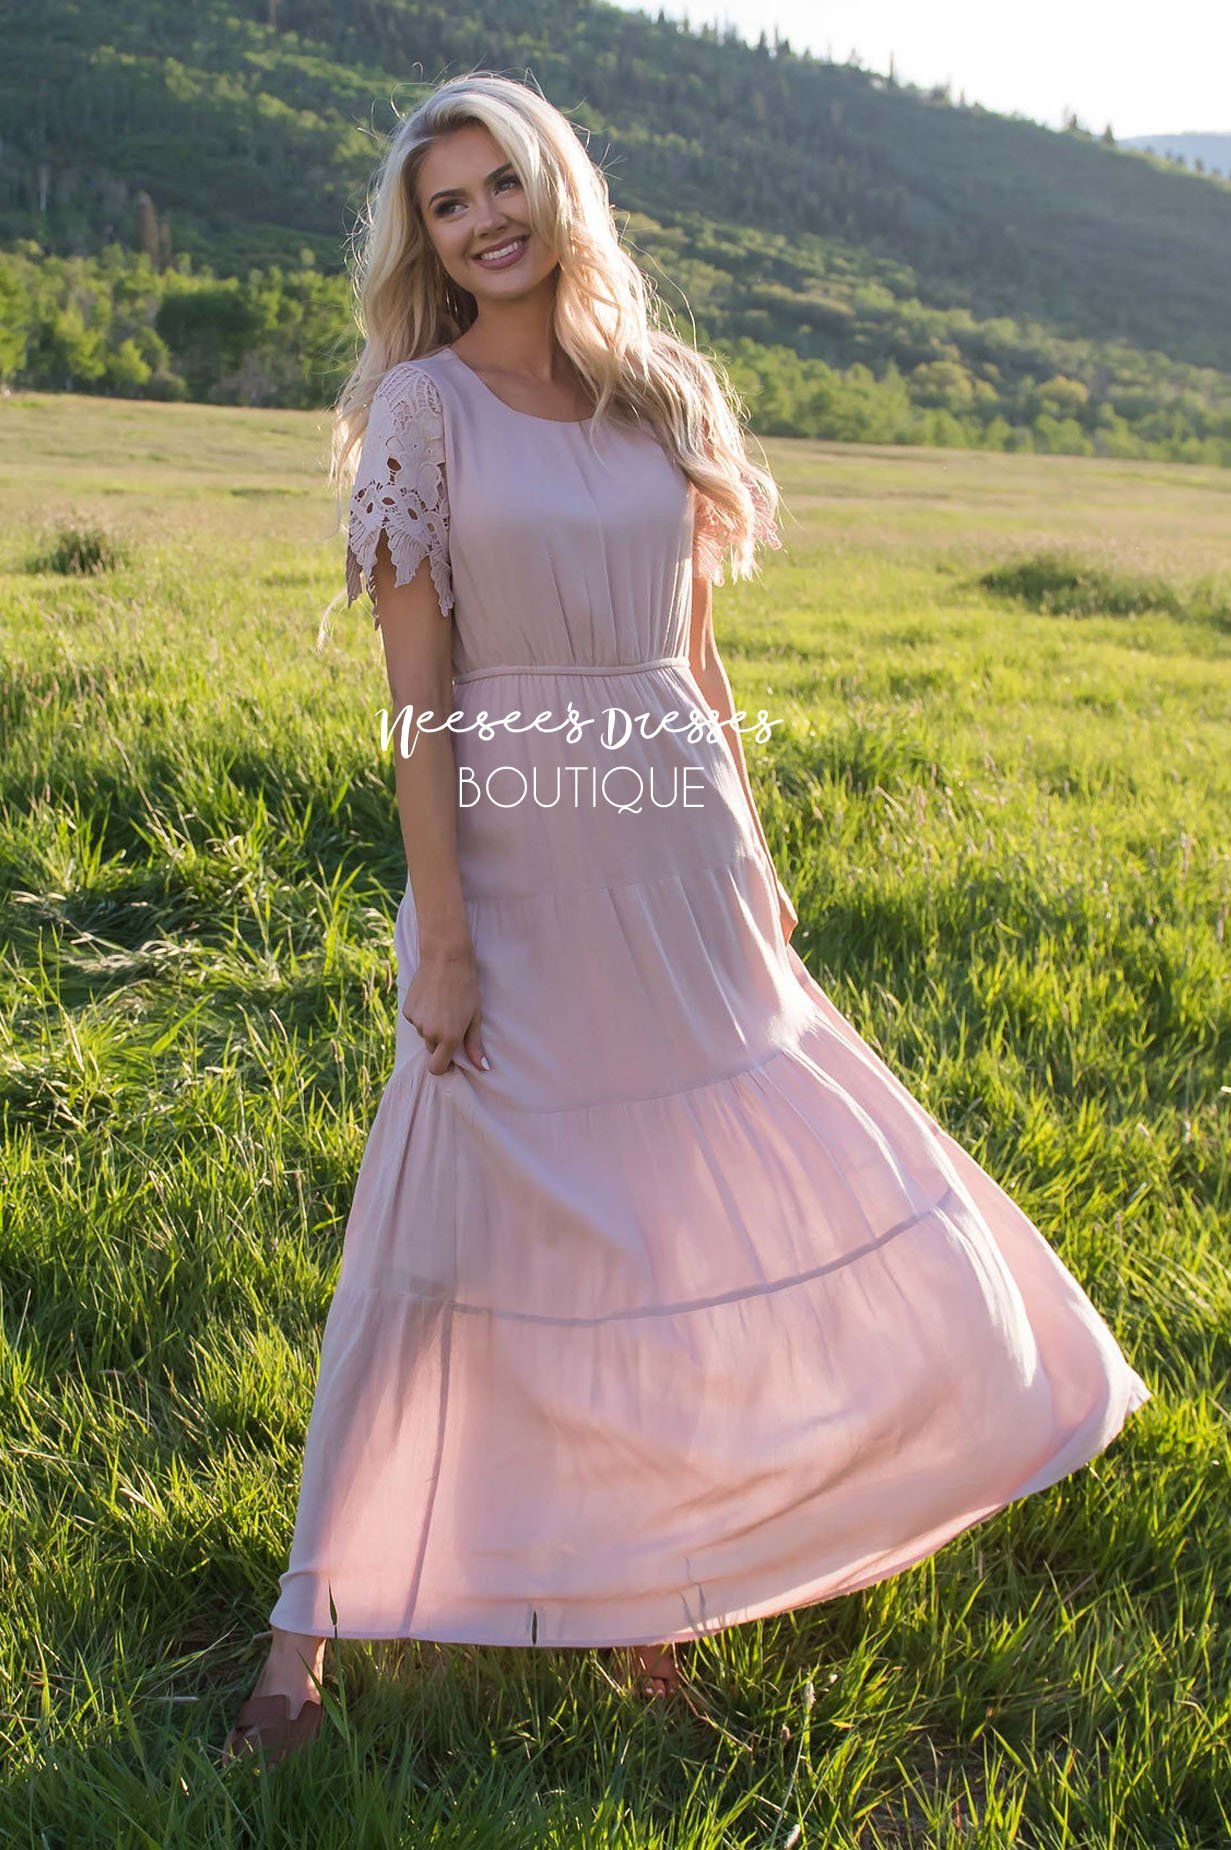 Blush Pink Modest Dress | Best and Affordable Modest Boutique | Cute ...